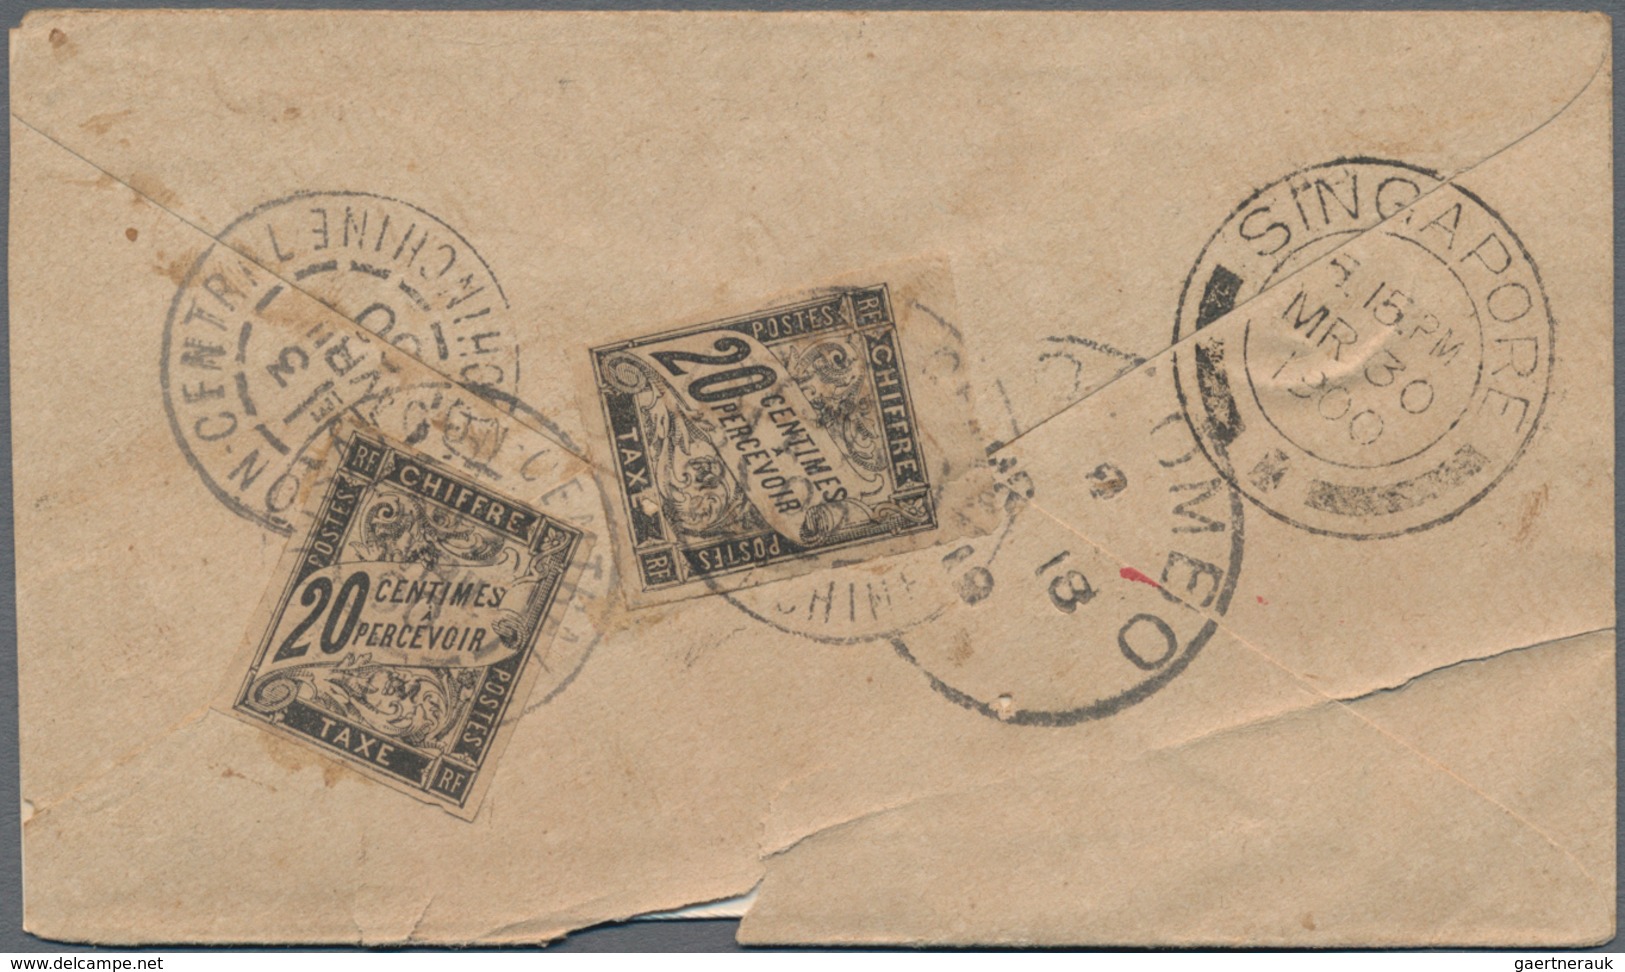 Französisch-Indochina - Portomarken: 1900 Two Indian Postal Stationery Envelopes ½a. Green Used From - Postage Due